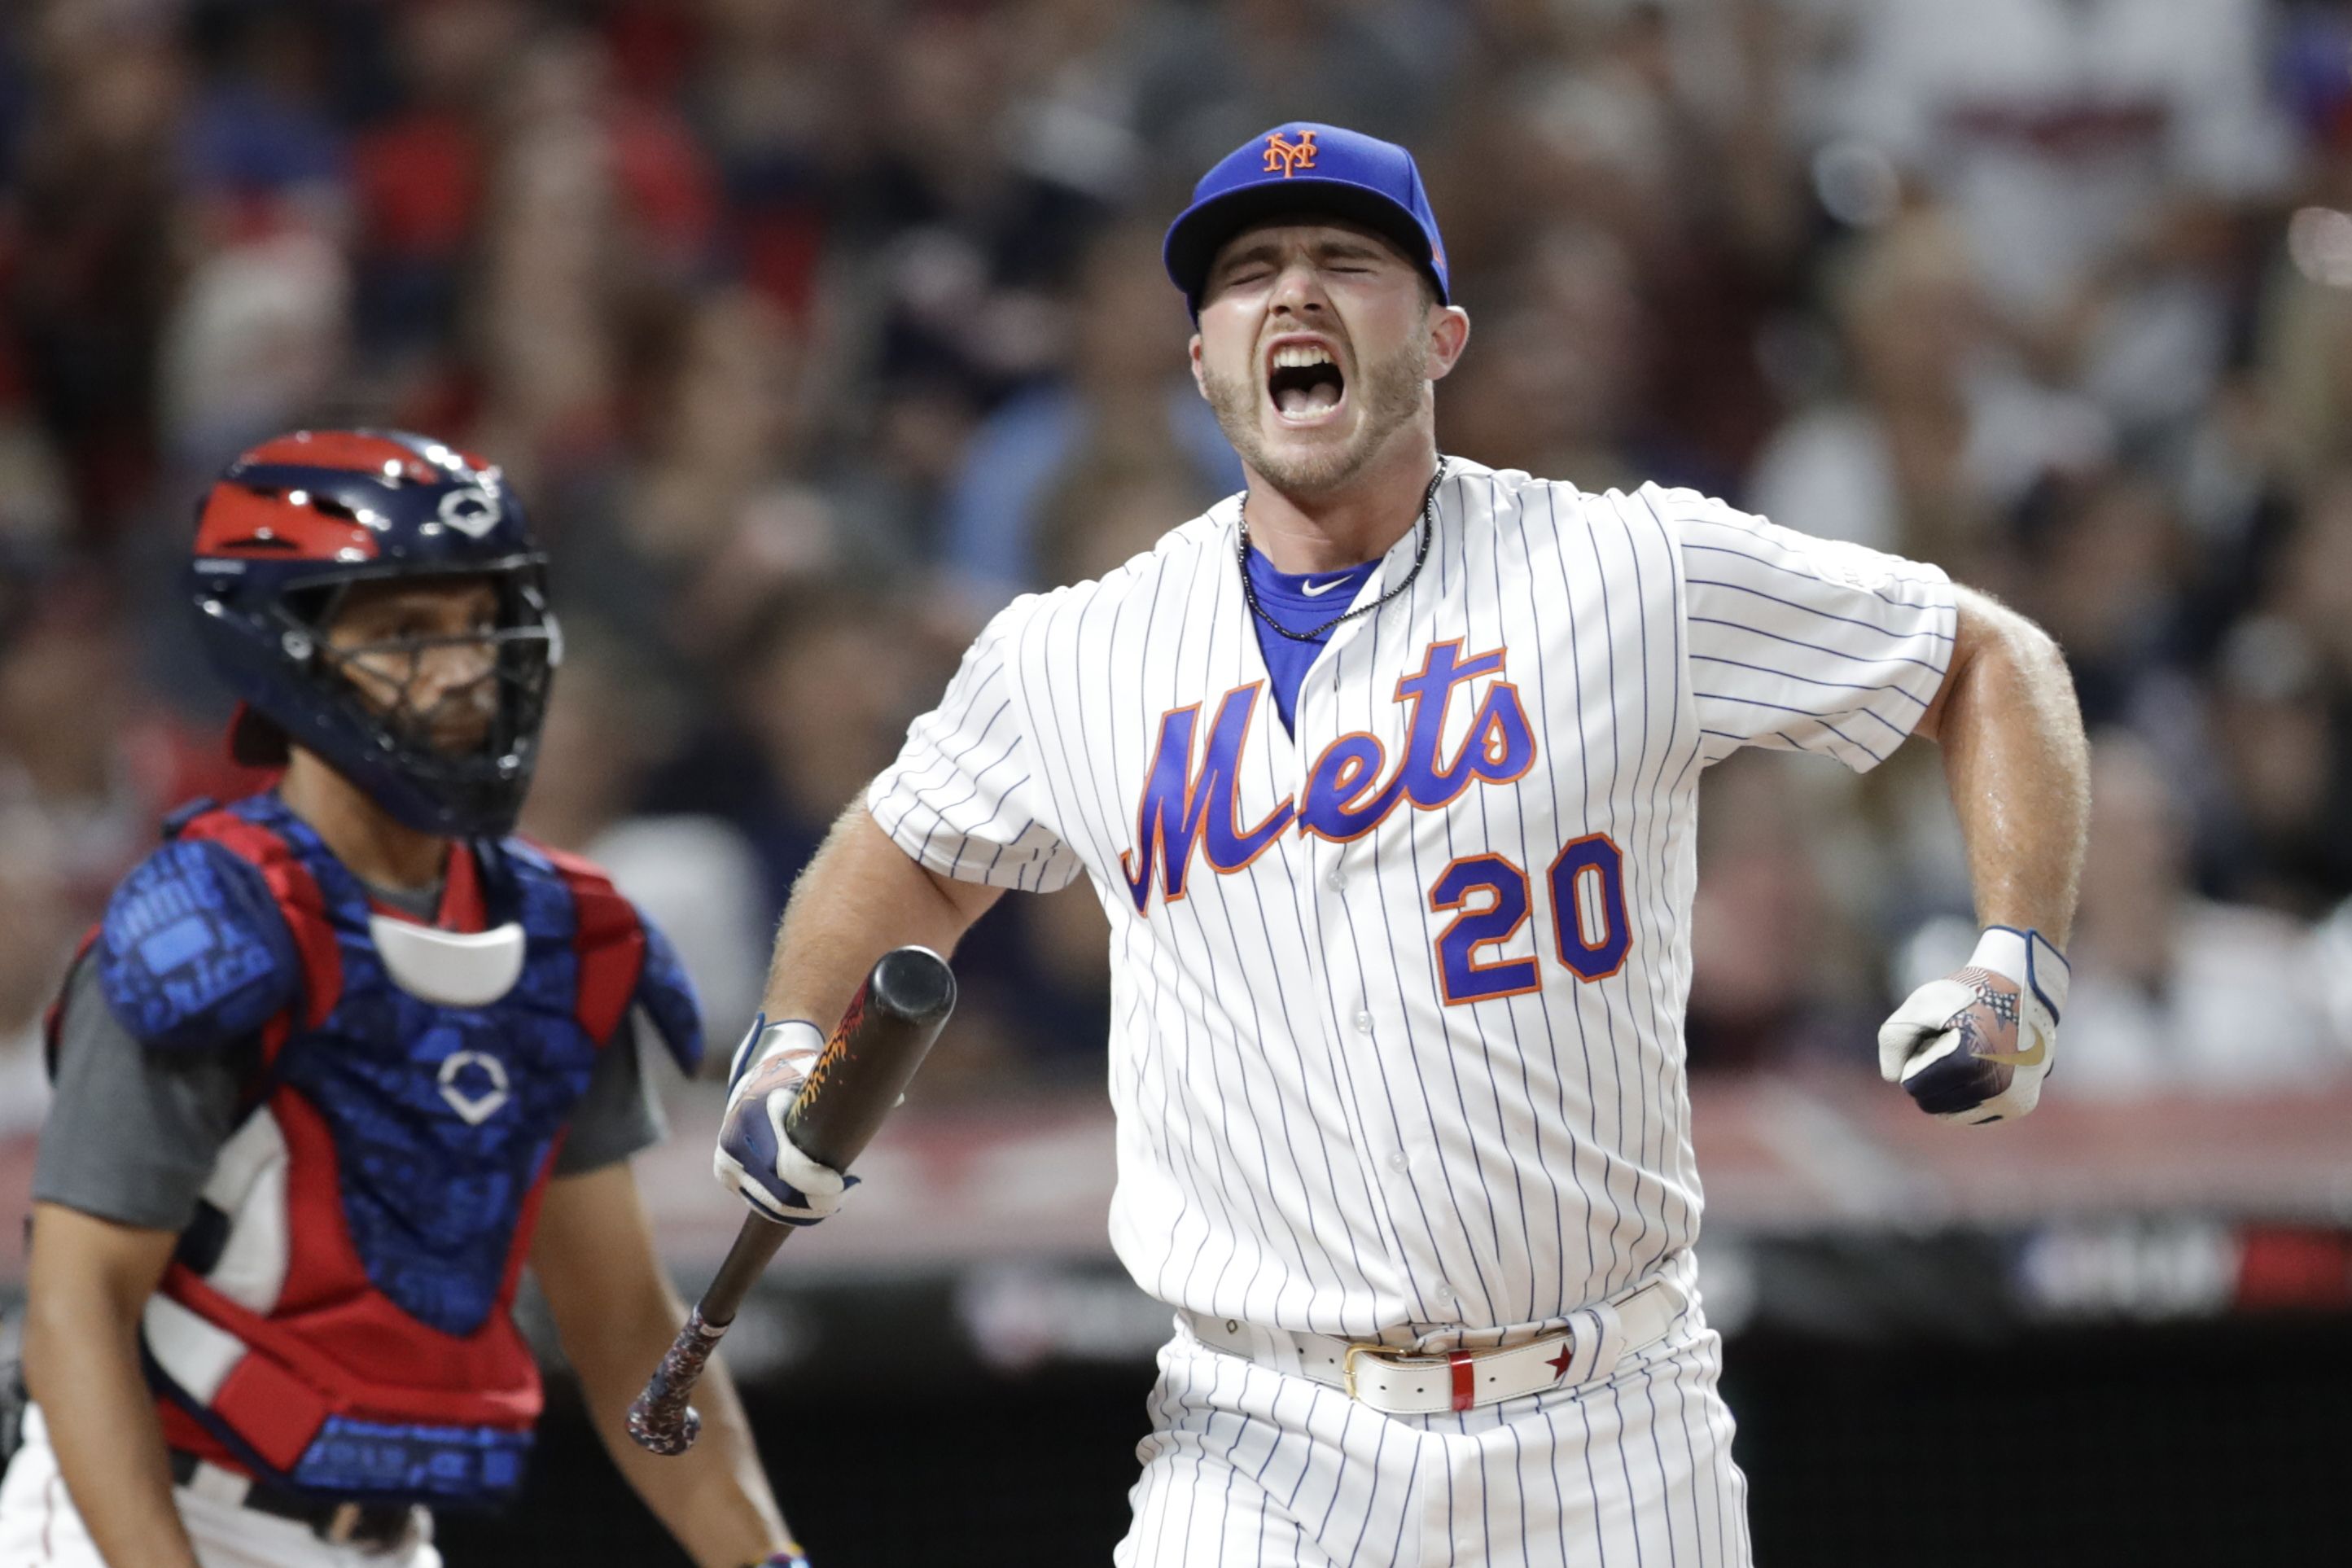 NISSAN Social Drive: Pete Alonso Shaves His Mustache Mid-Game 